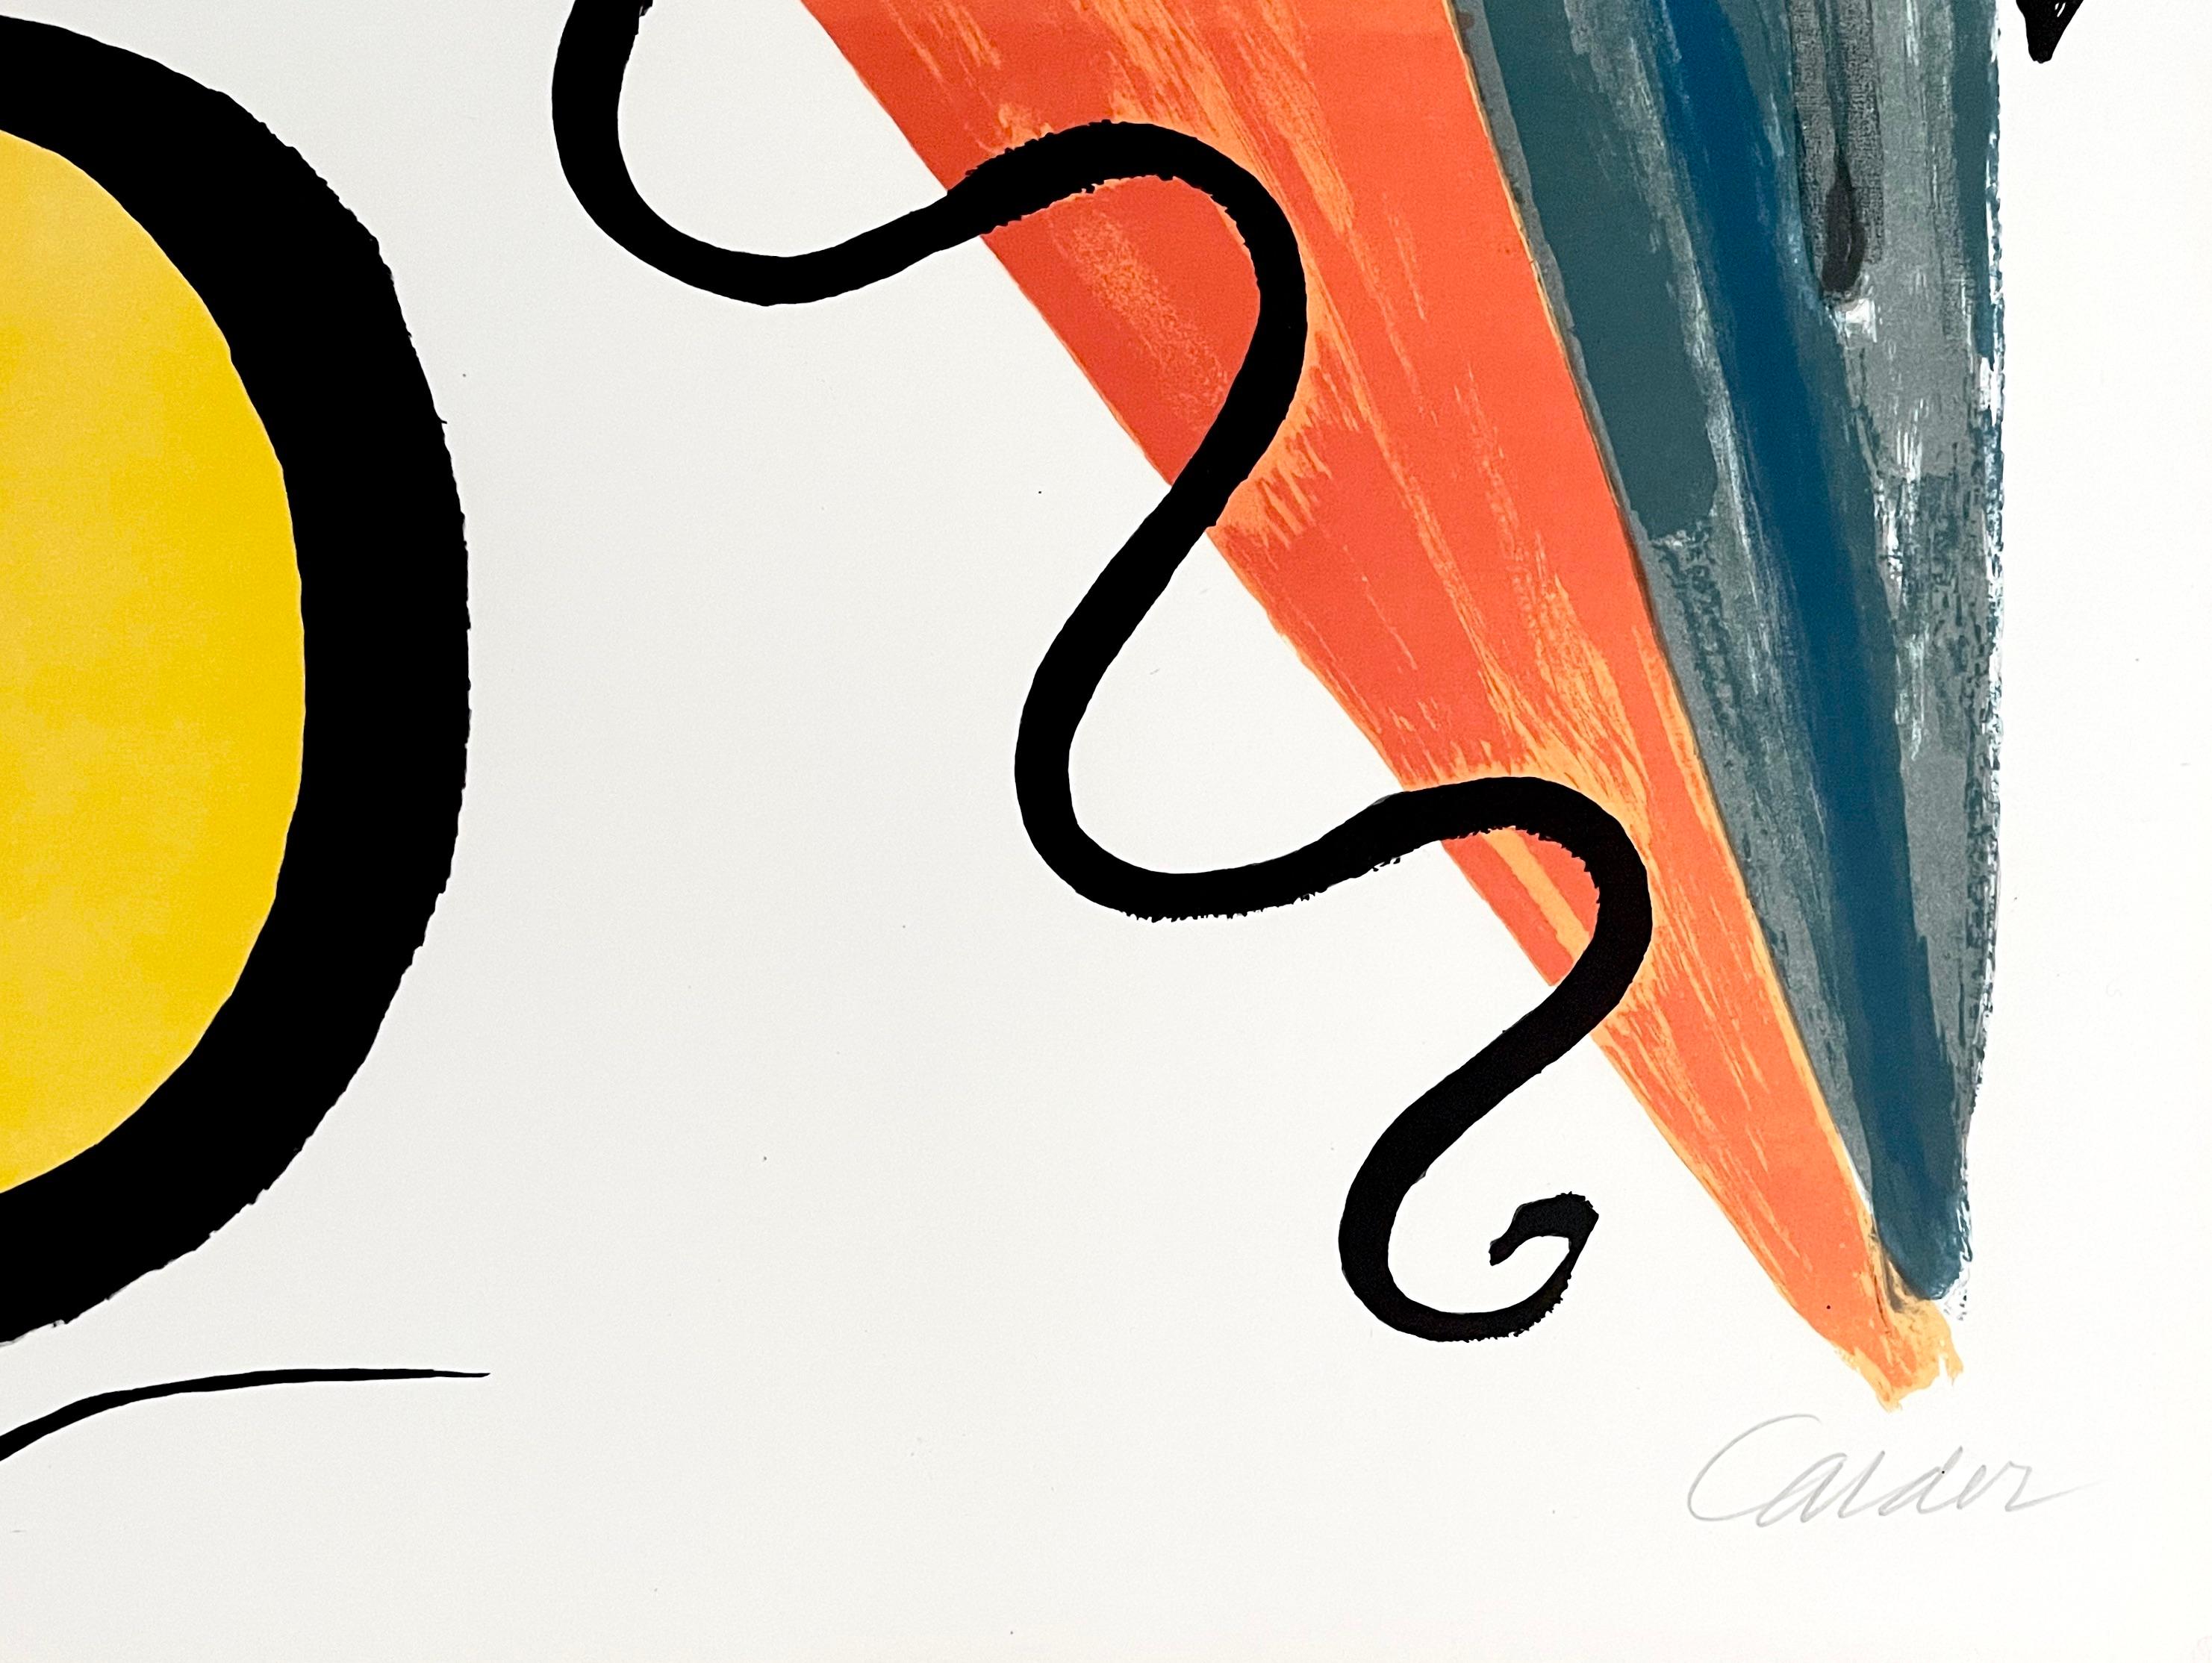 Artist: Alexander Calder (1898-1976)
Title: Cinq Boules et Deux Serpents
Year: 1965
Medium: Lithograph in colors on wove paper
Edition: 90, plus proofs
Size: 20.5 x 28.75 inches
Condition: Excellent
Inscription: Signed and numbered 50/90 in pencil